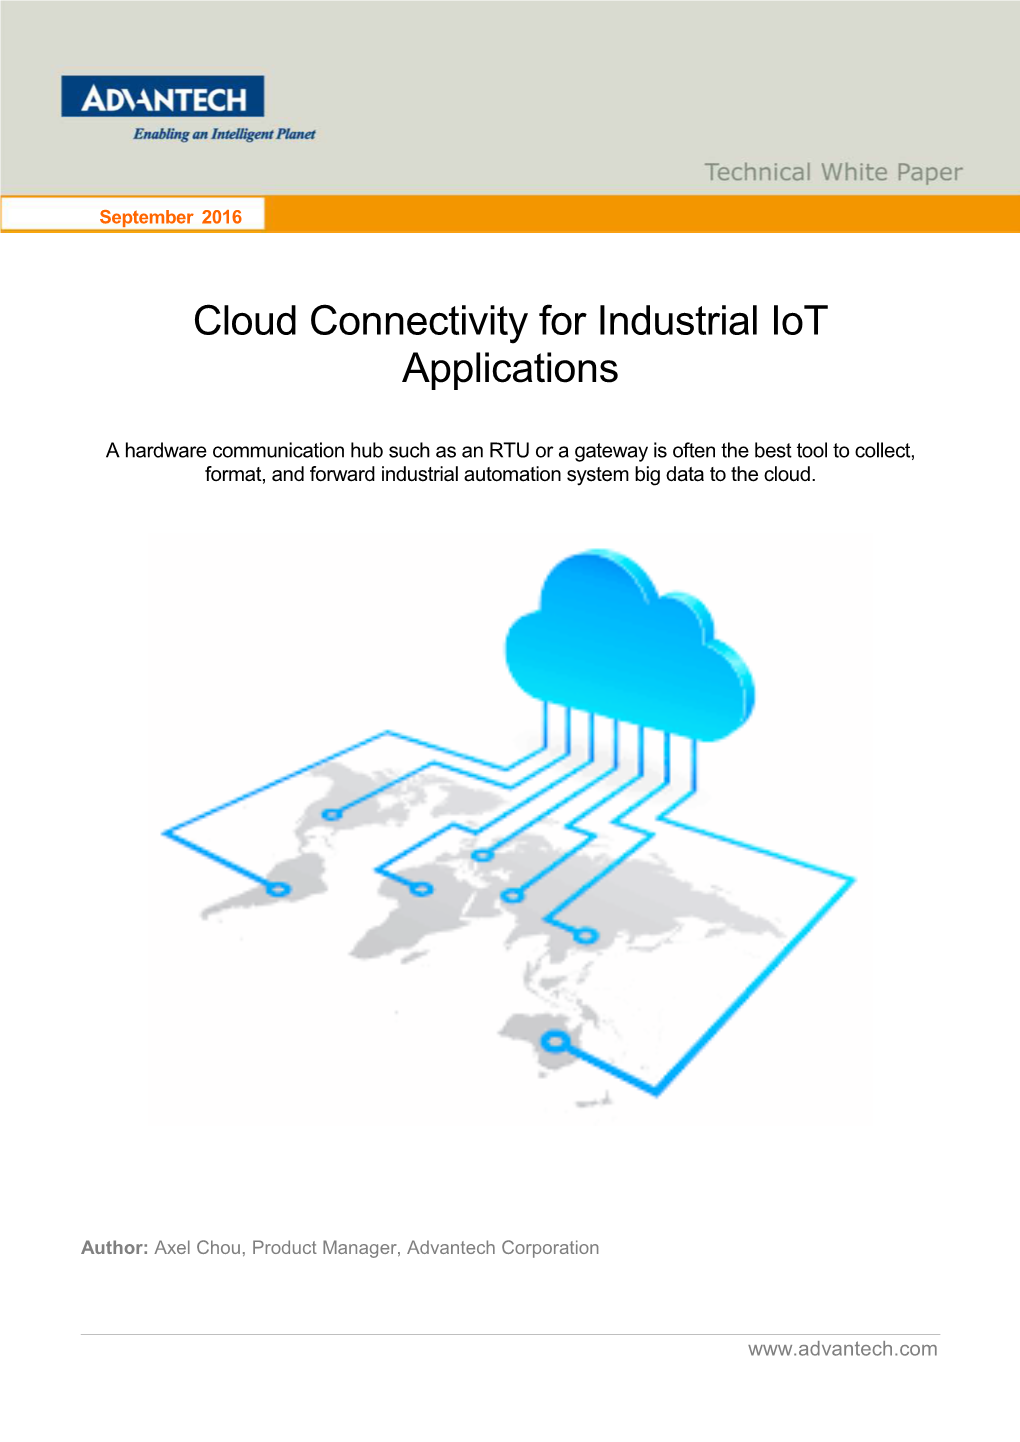 Cloud Connectivity for Industrial Iot Applications